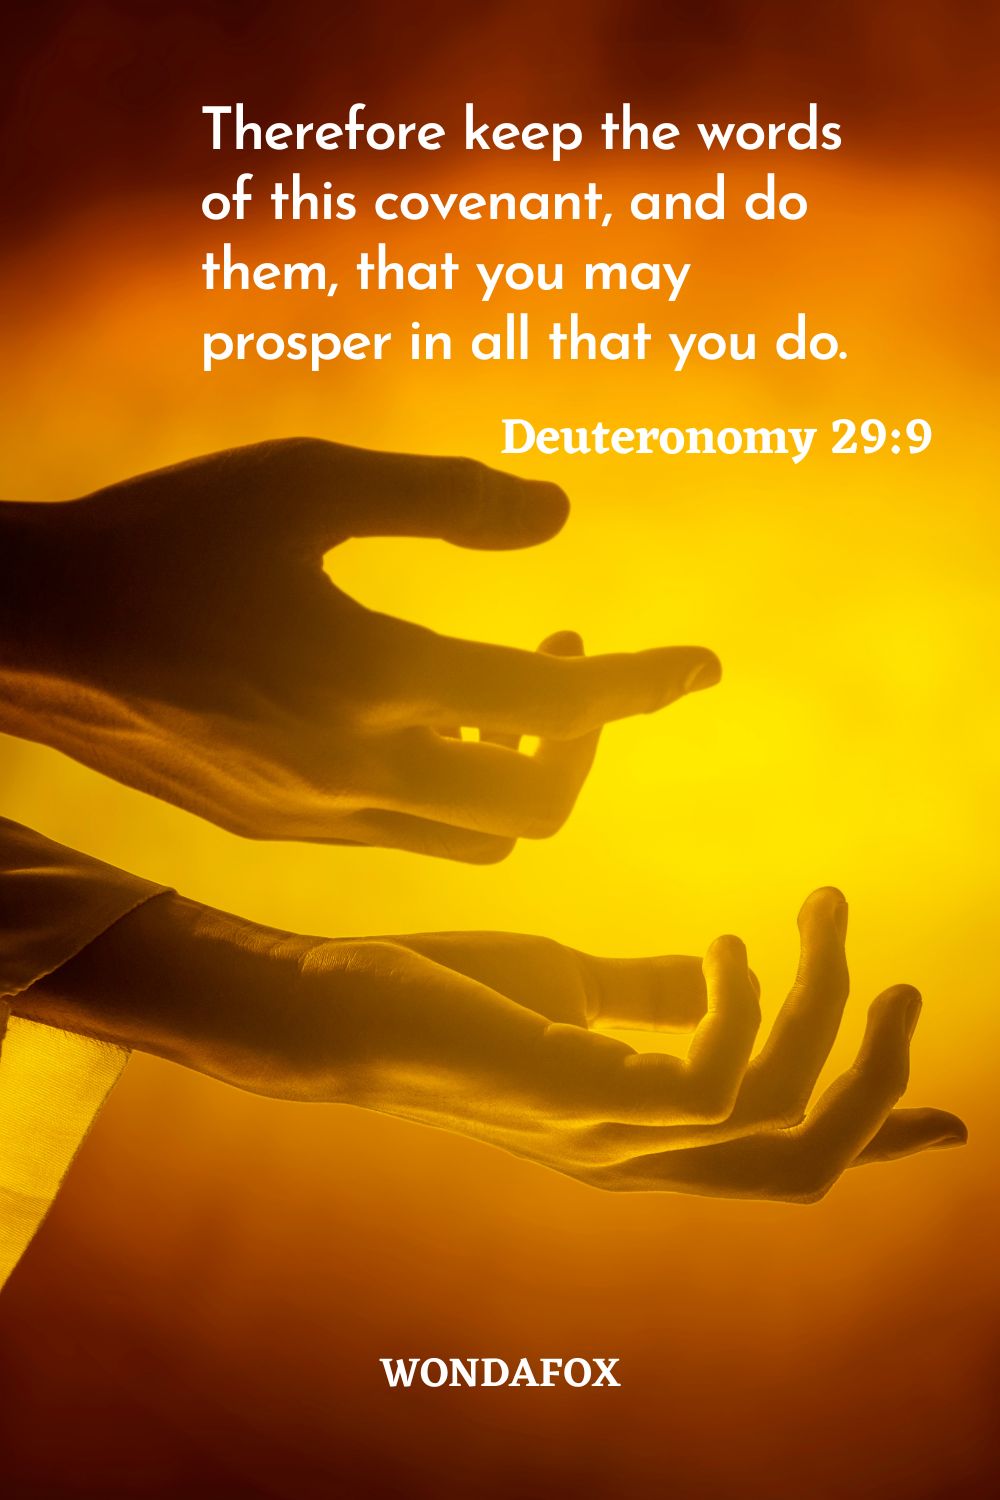 Therefore keep the words of this covenant, and do them, that you may prosper in all that you do.
Deuteronomy 29:9